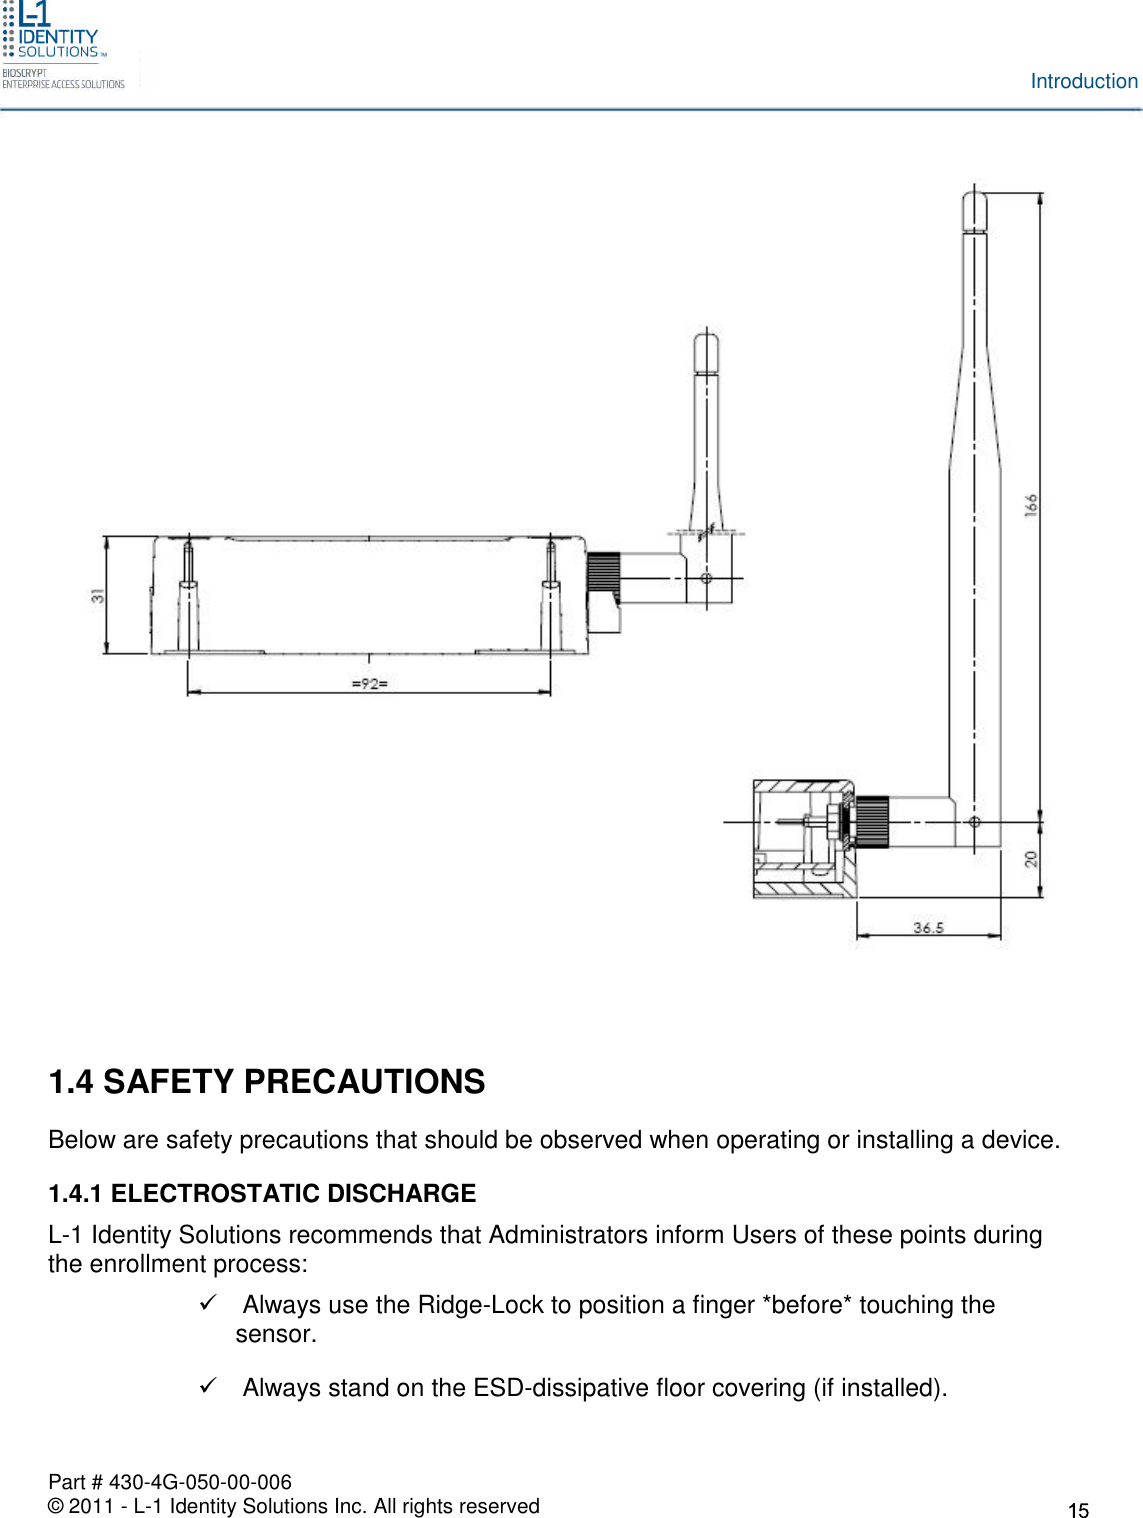 Part # 430-4G-050-00-006© 2011 - L-1 Identity Solutions Inc. All rights reservedIntroduction1.4 SAFETY PRECAUTIONSBelow are safety precautions that should be observed when operating or installing a device.1.4.1 ELECTROSTATIC DISCHARGEL-1 Identity Solutions recommends that Administrators inform Users of these points duringthe enrollment process:Always use the Ridge-Lock to position a finger *before* touching thesensor.Always stand on the ESD-dissipative floor covering (if installed).